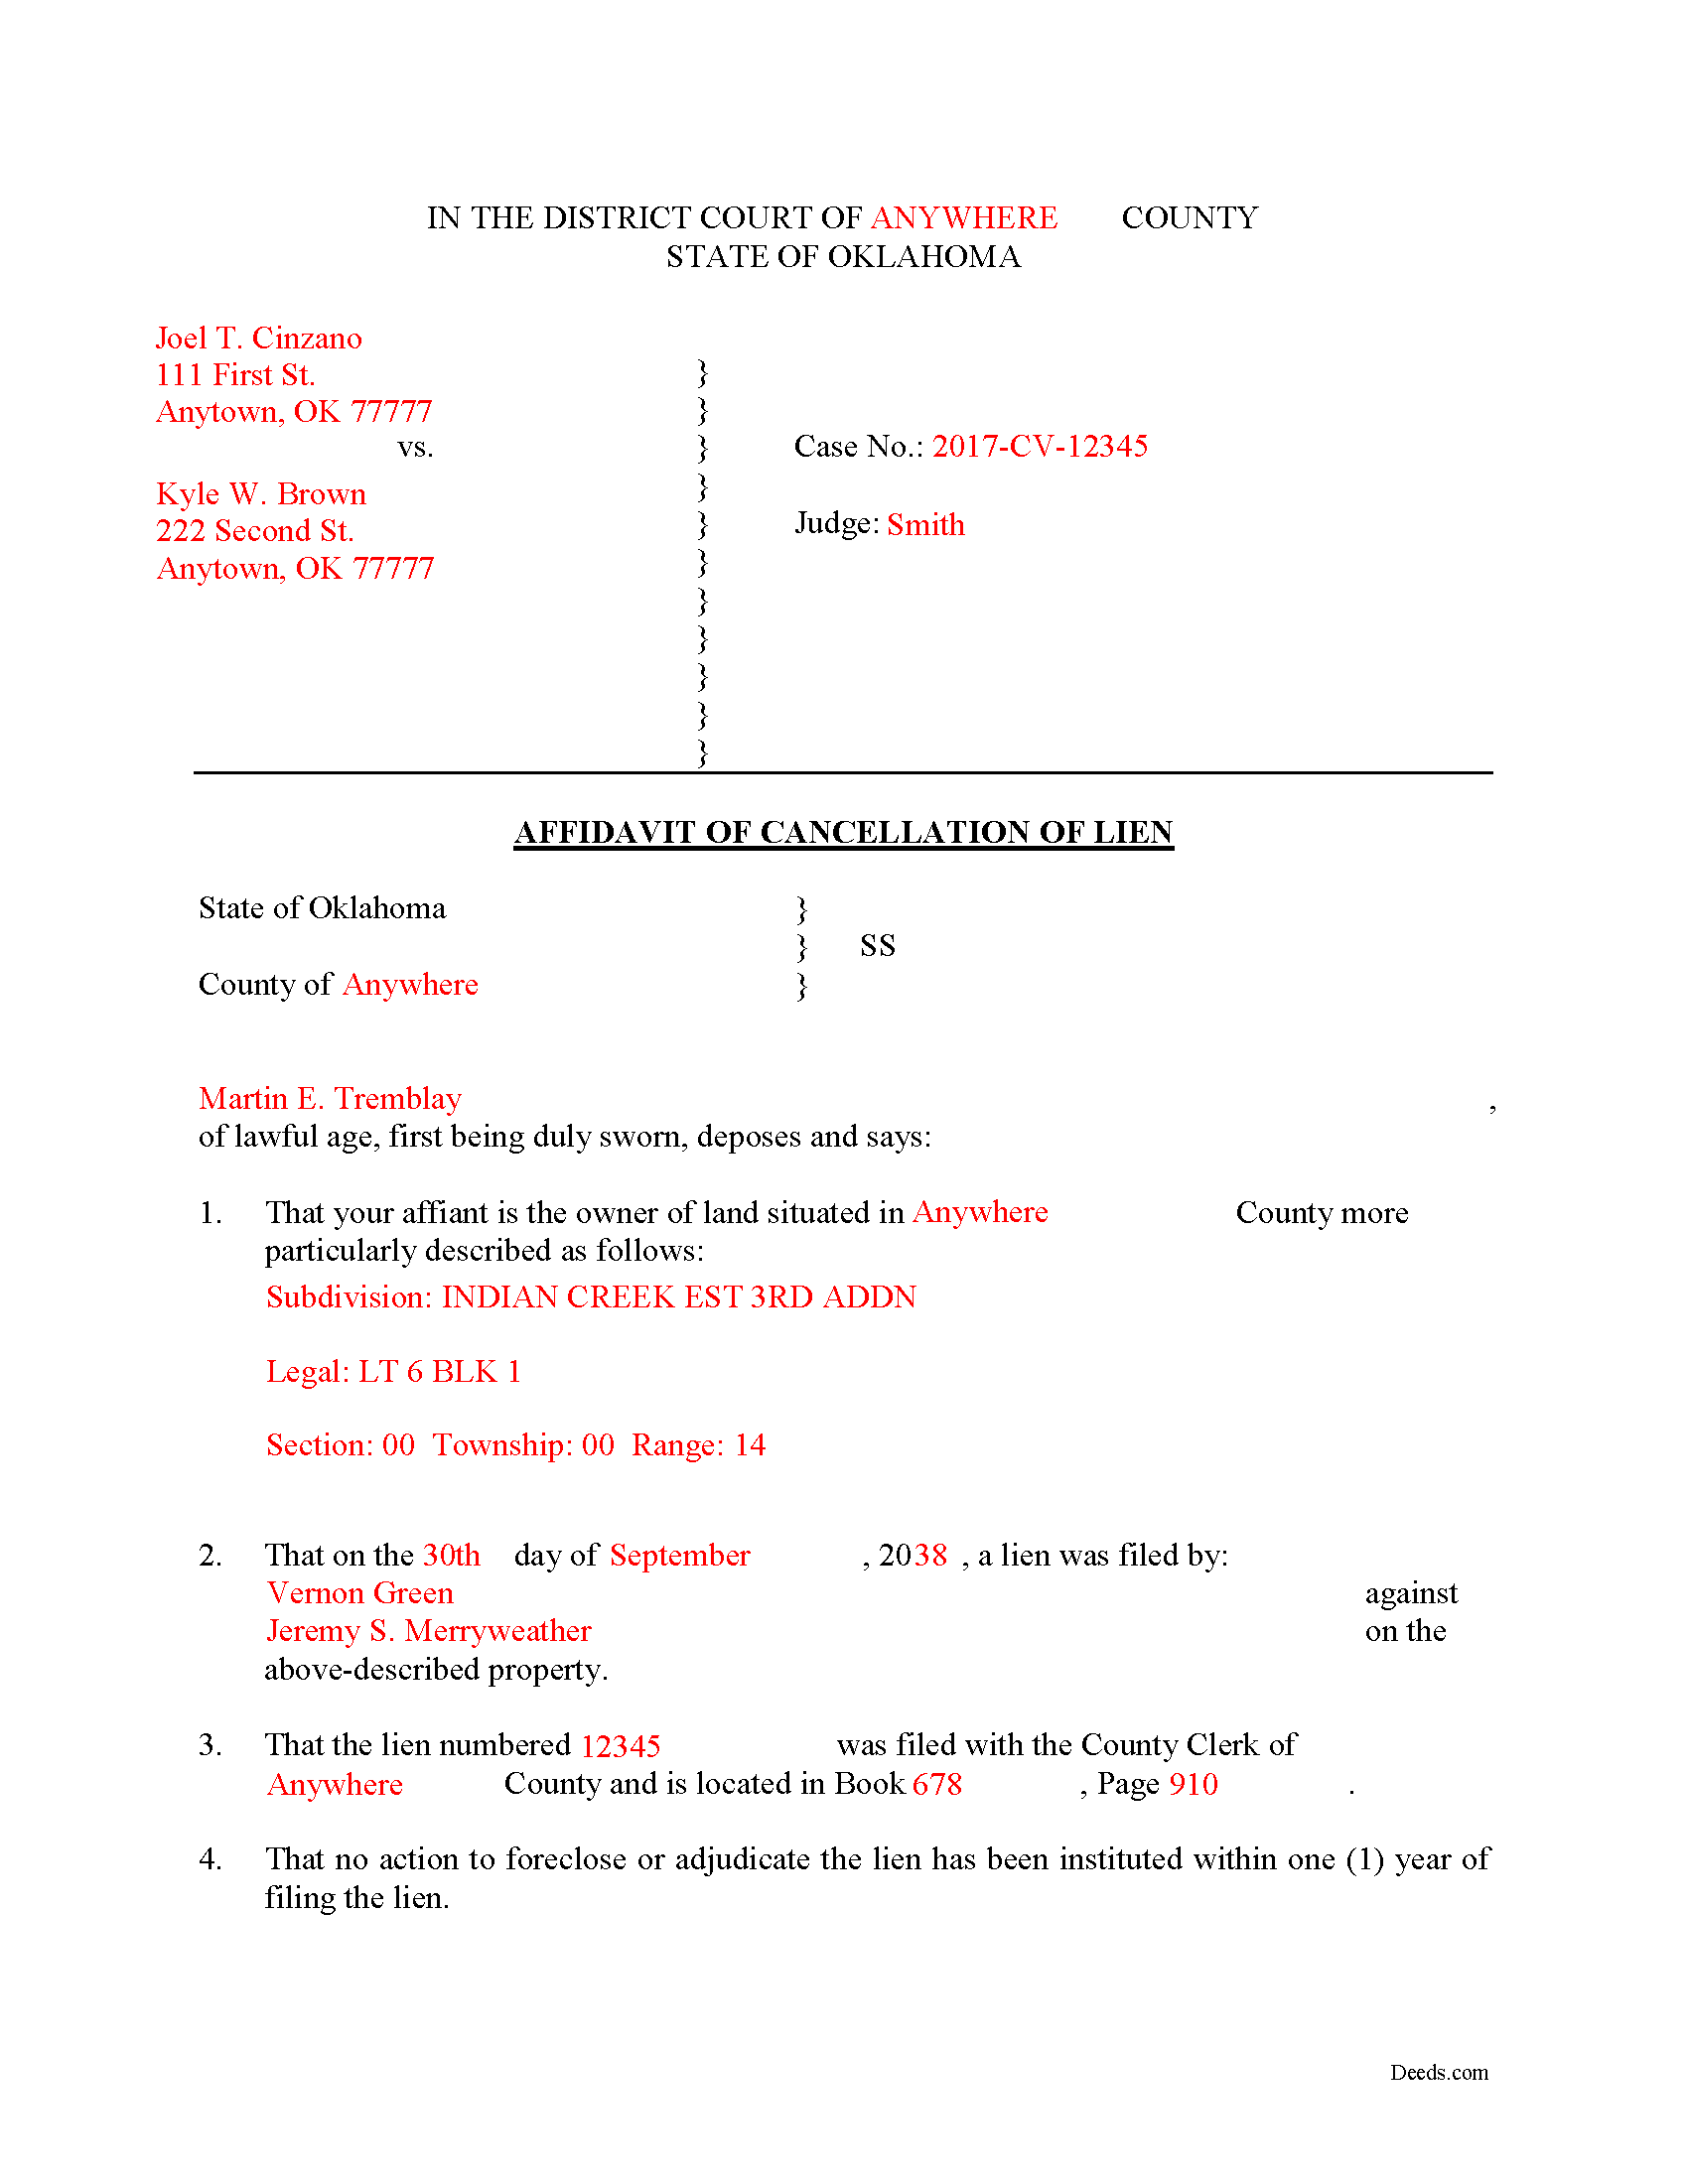 Completed Example of the Affidavit of Cancellation of Lien Document